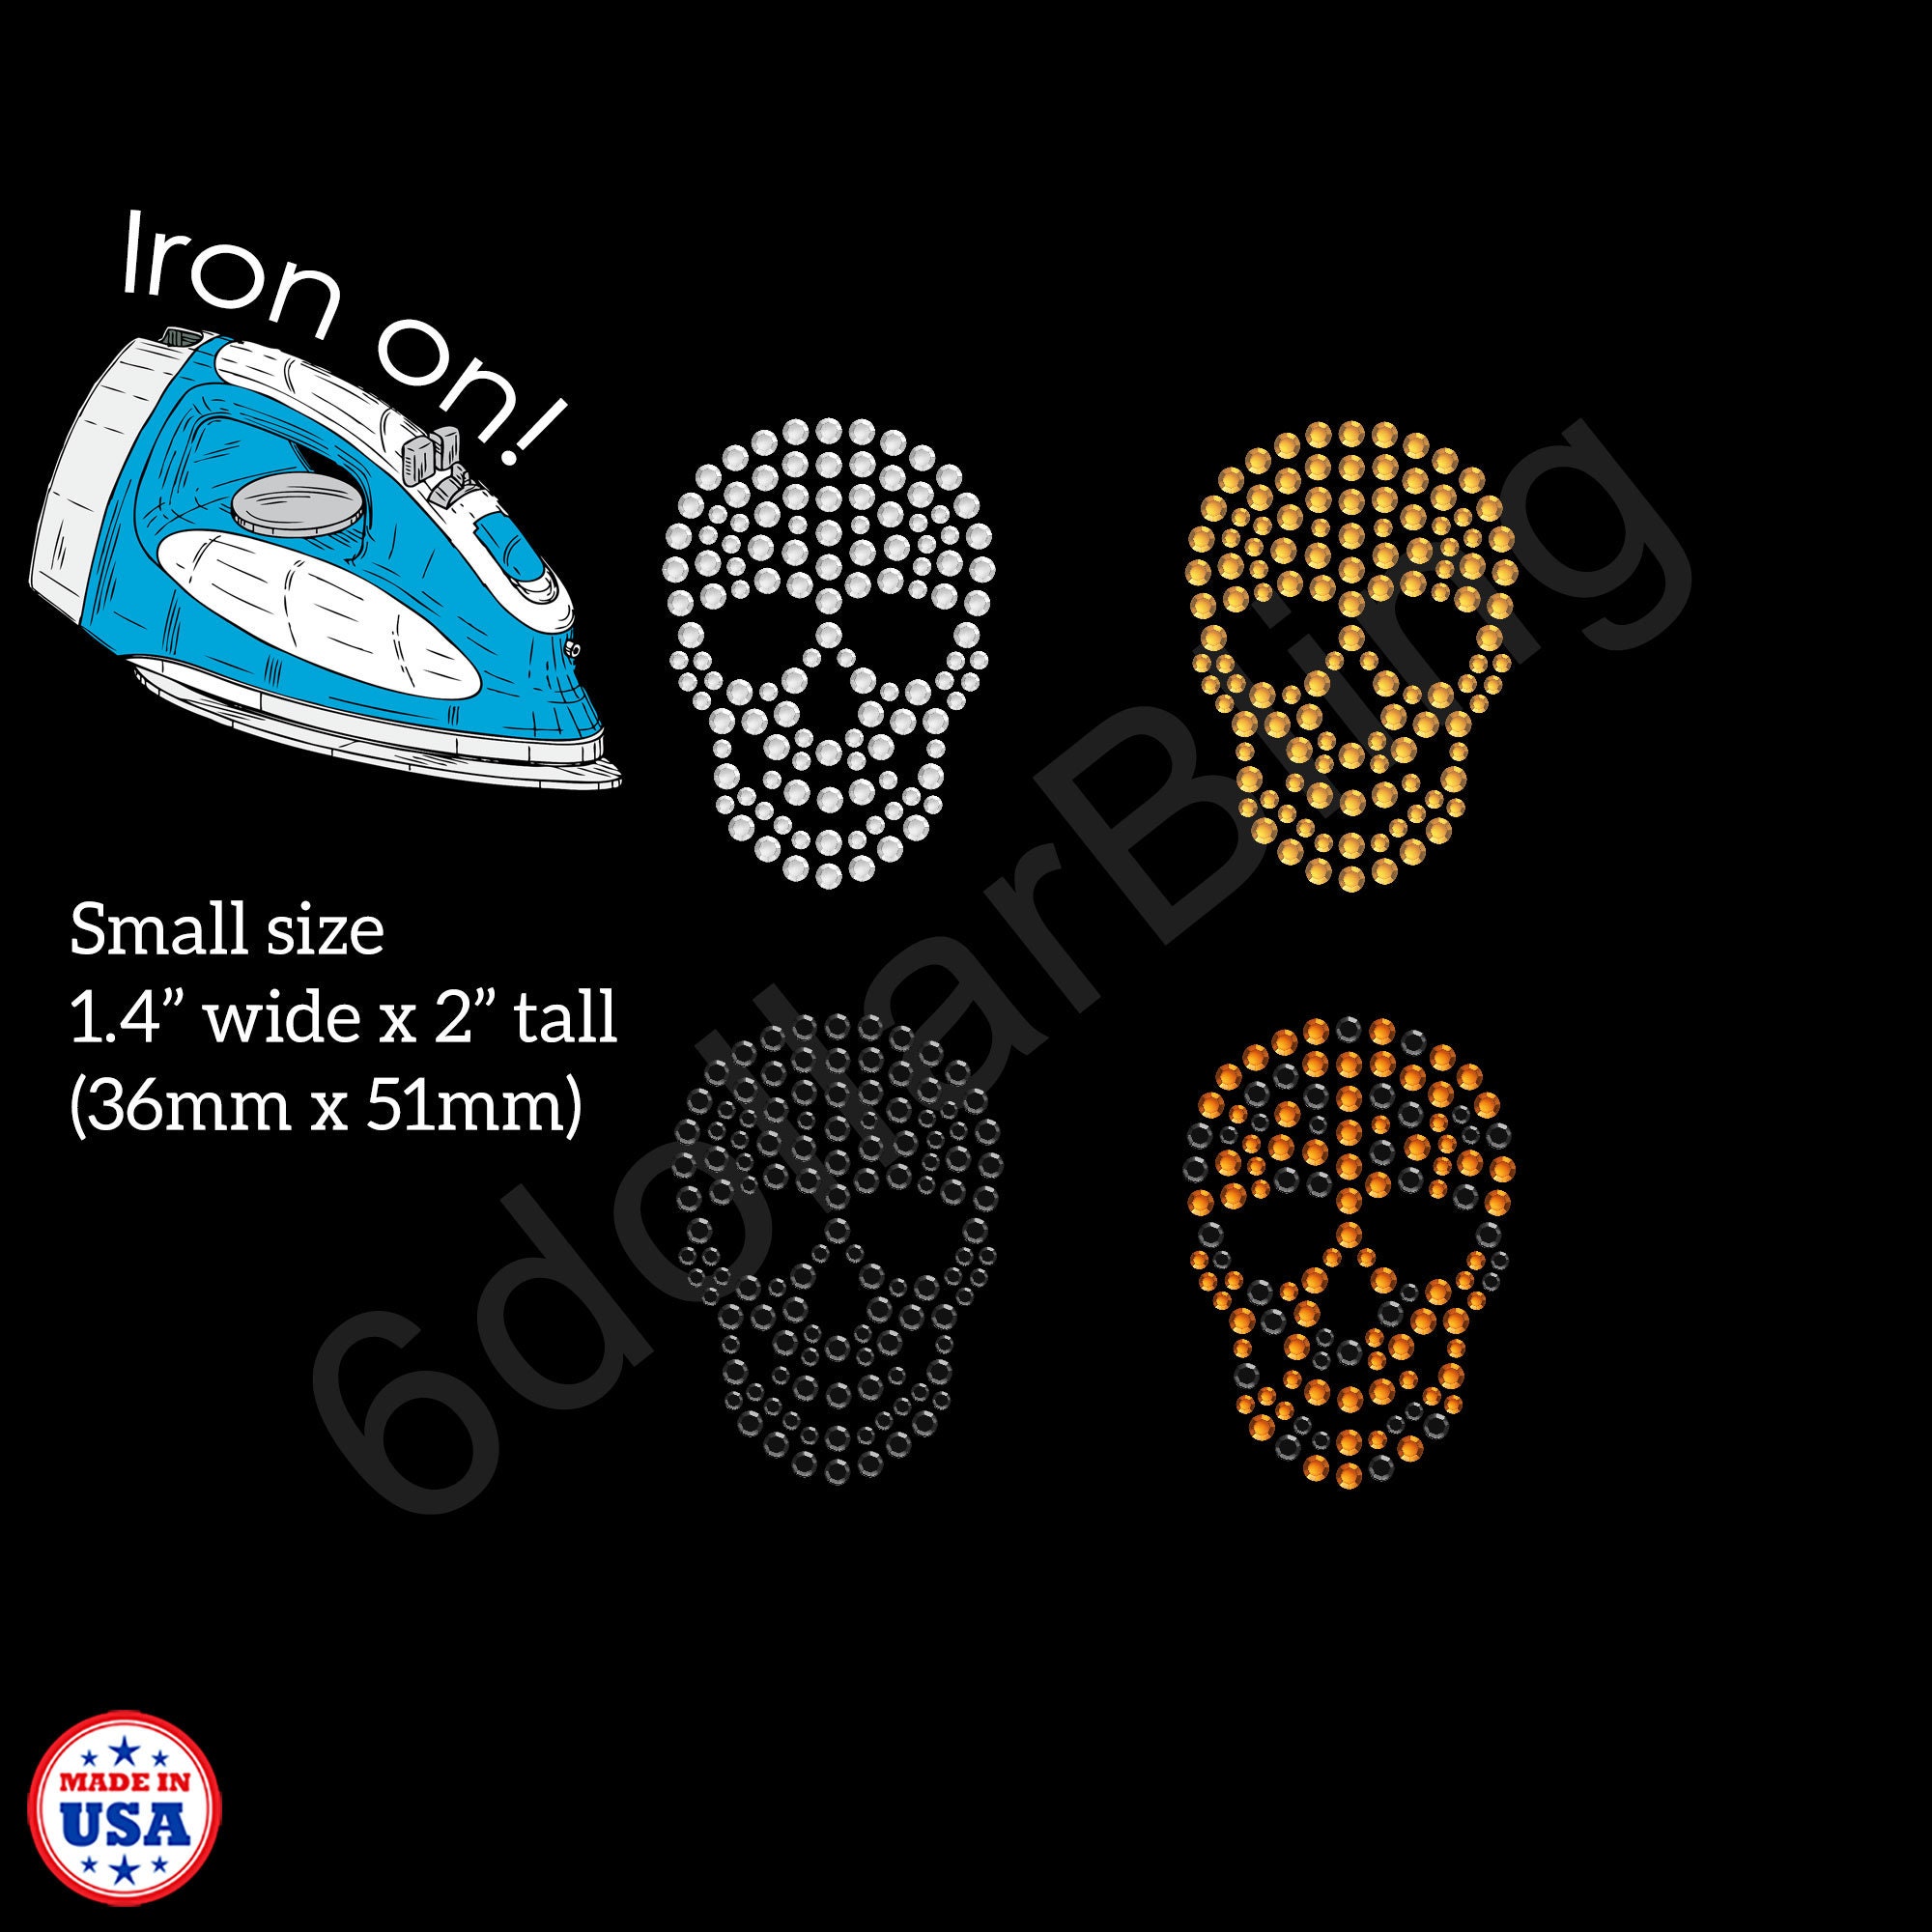 Small Stars Rhinestone Iron-on Crystal Various Bling Hotfix Sparkle  Transfer Applique Make Your Own Star Cheer Bows, Mask, Shirt DIY -   Israel